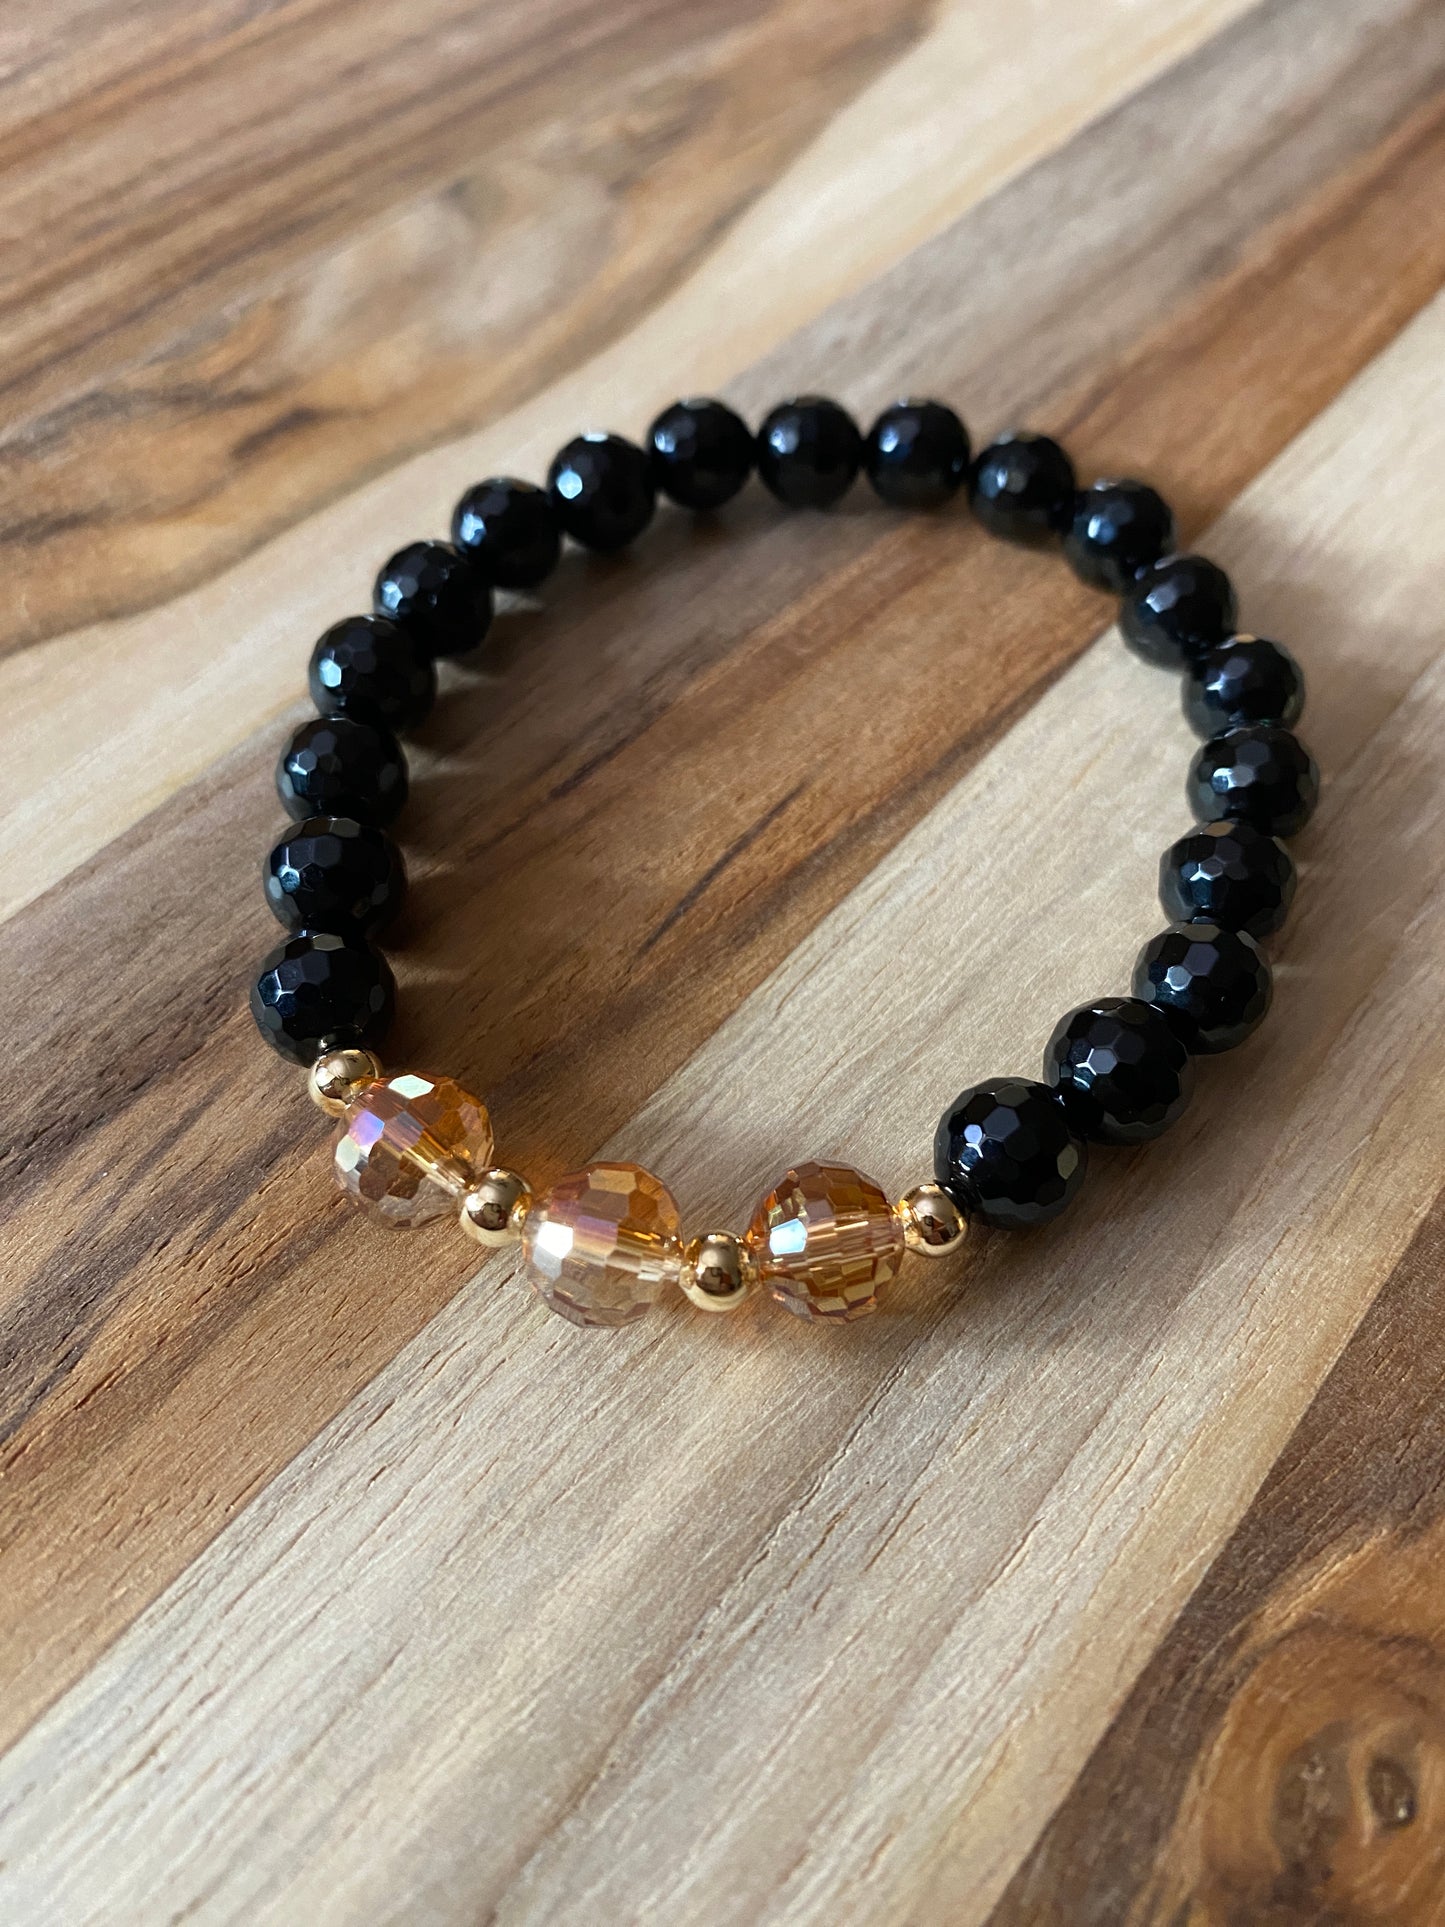 Faceted Black Onyx Beaded Stretch Bracelet with Multi Faceted Crystal Beads